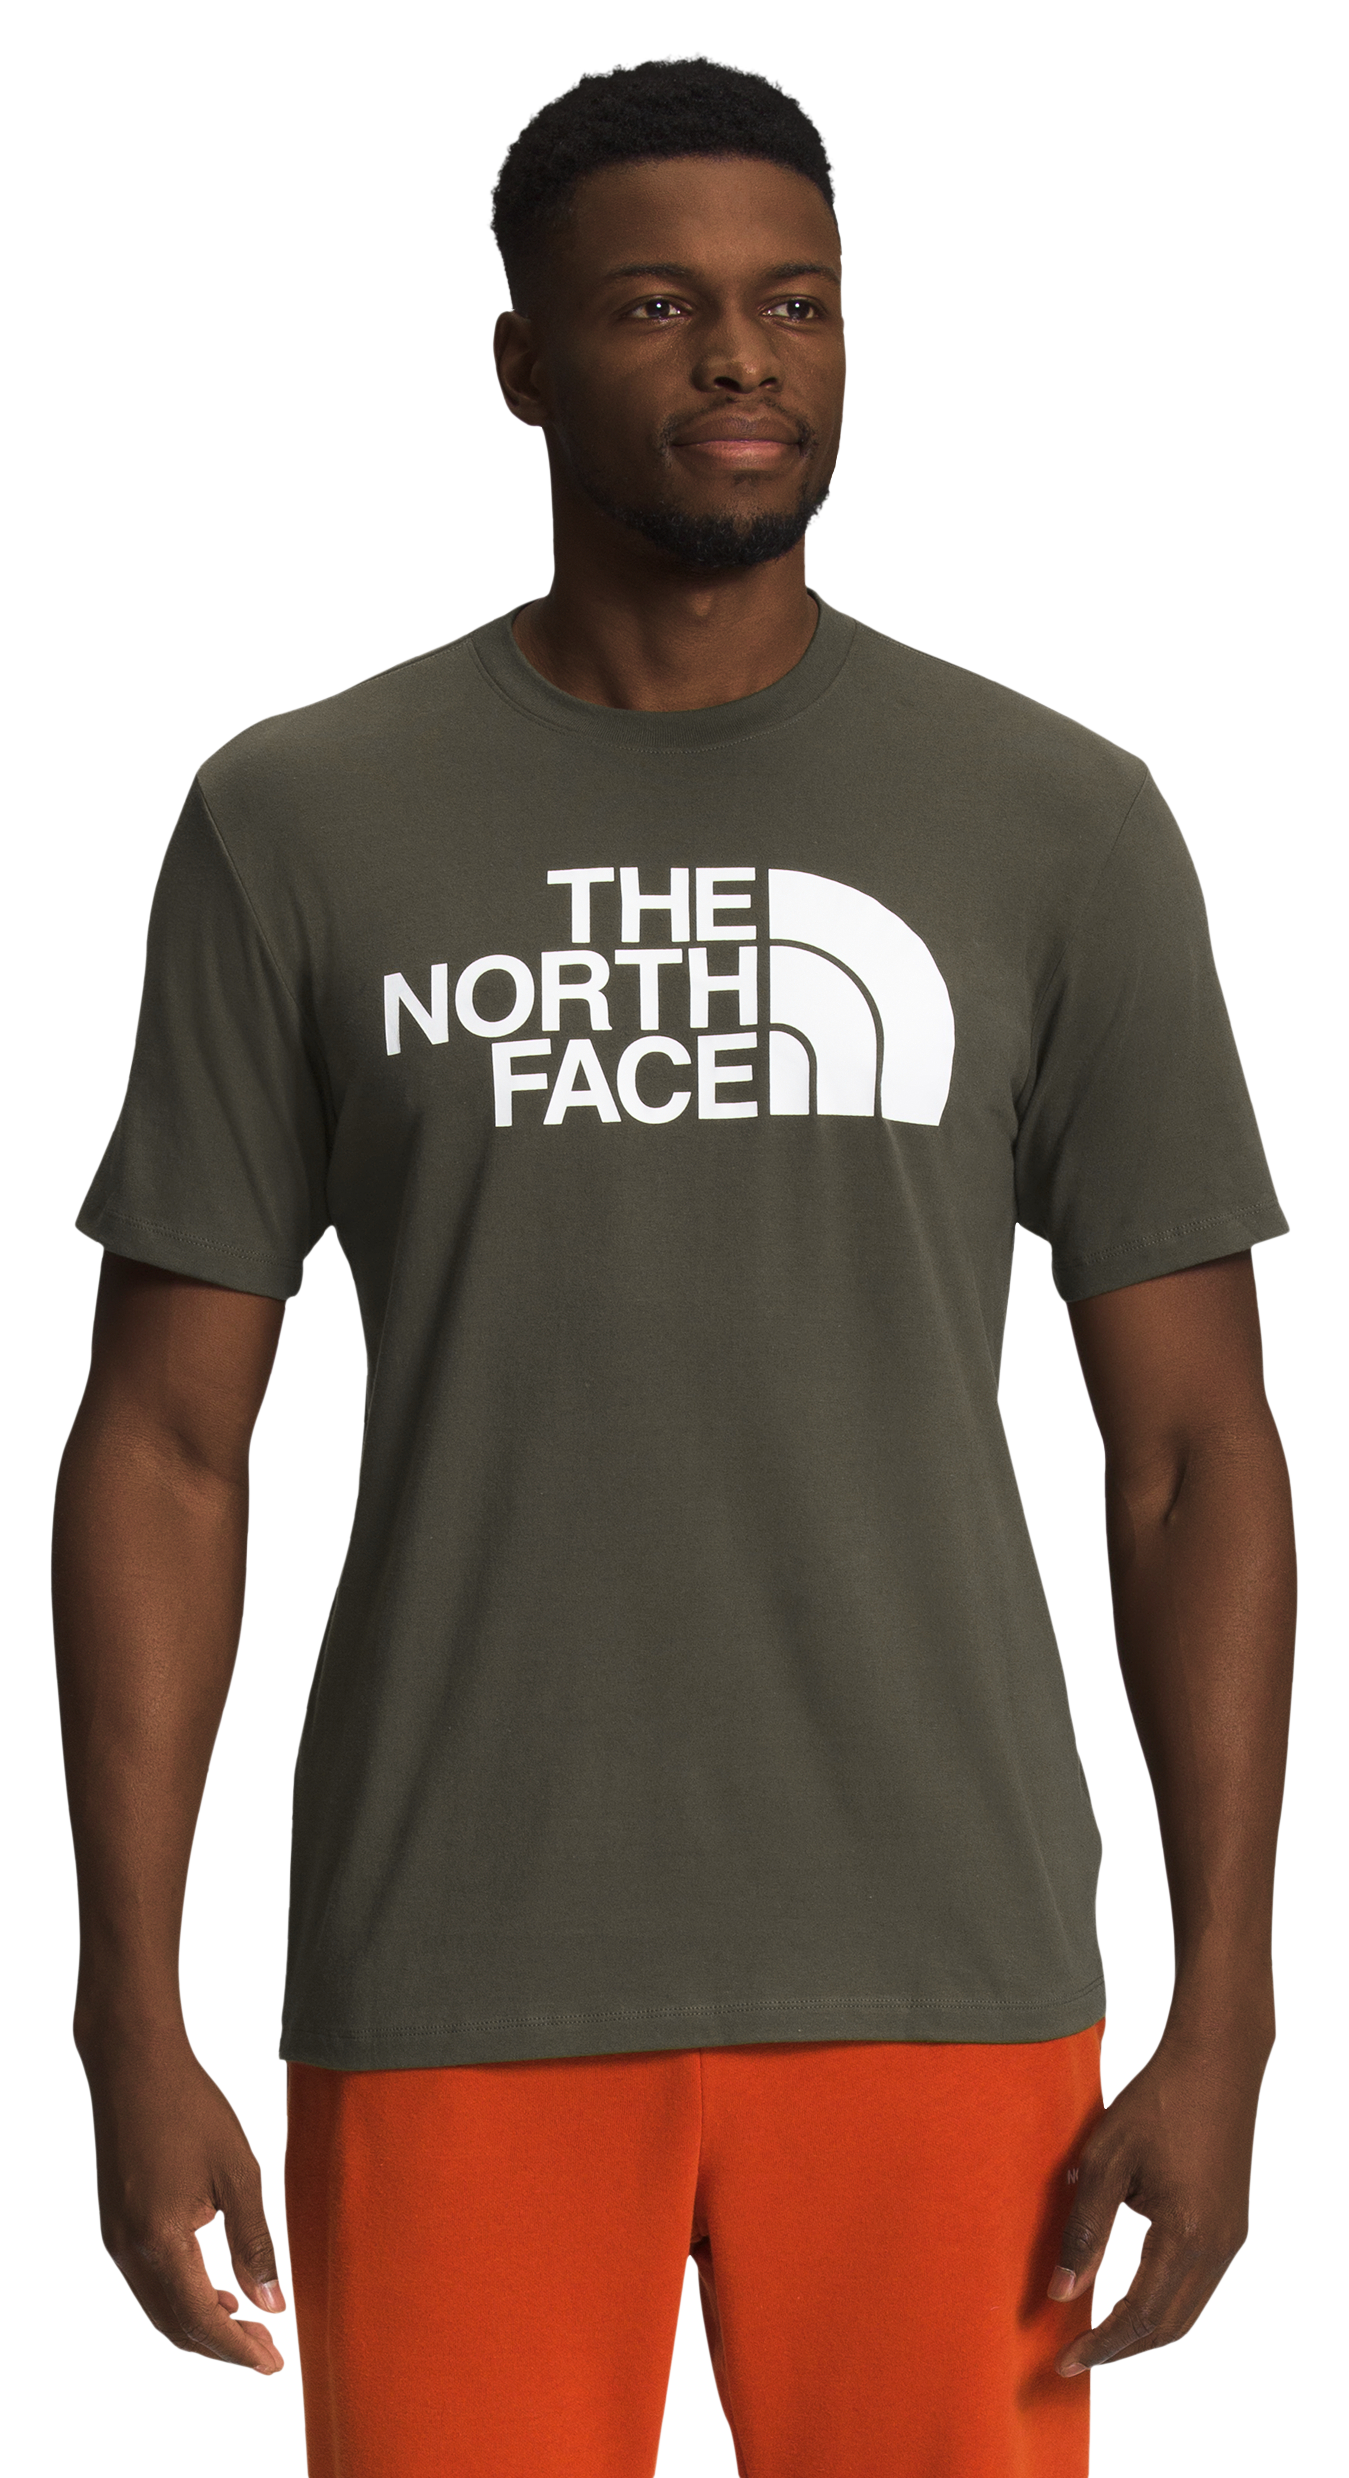 The North Face Half Dome Short-Sleeve T-Shirt for Men - New Taupe Green/White - L